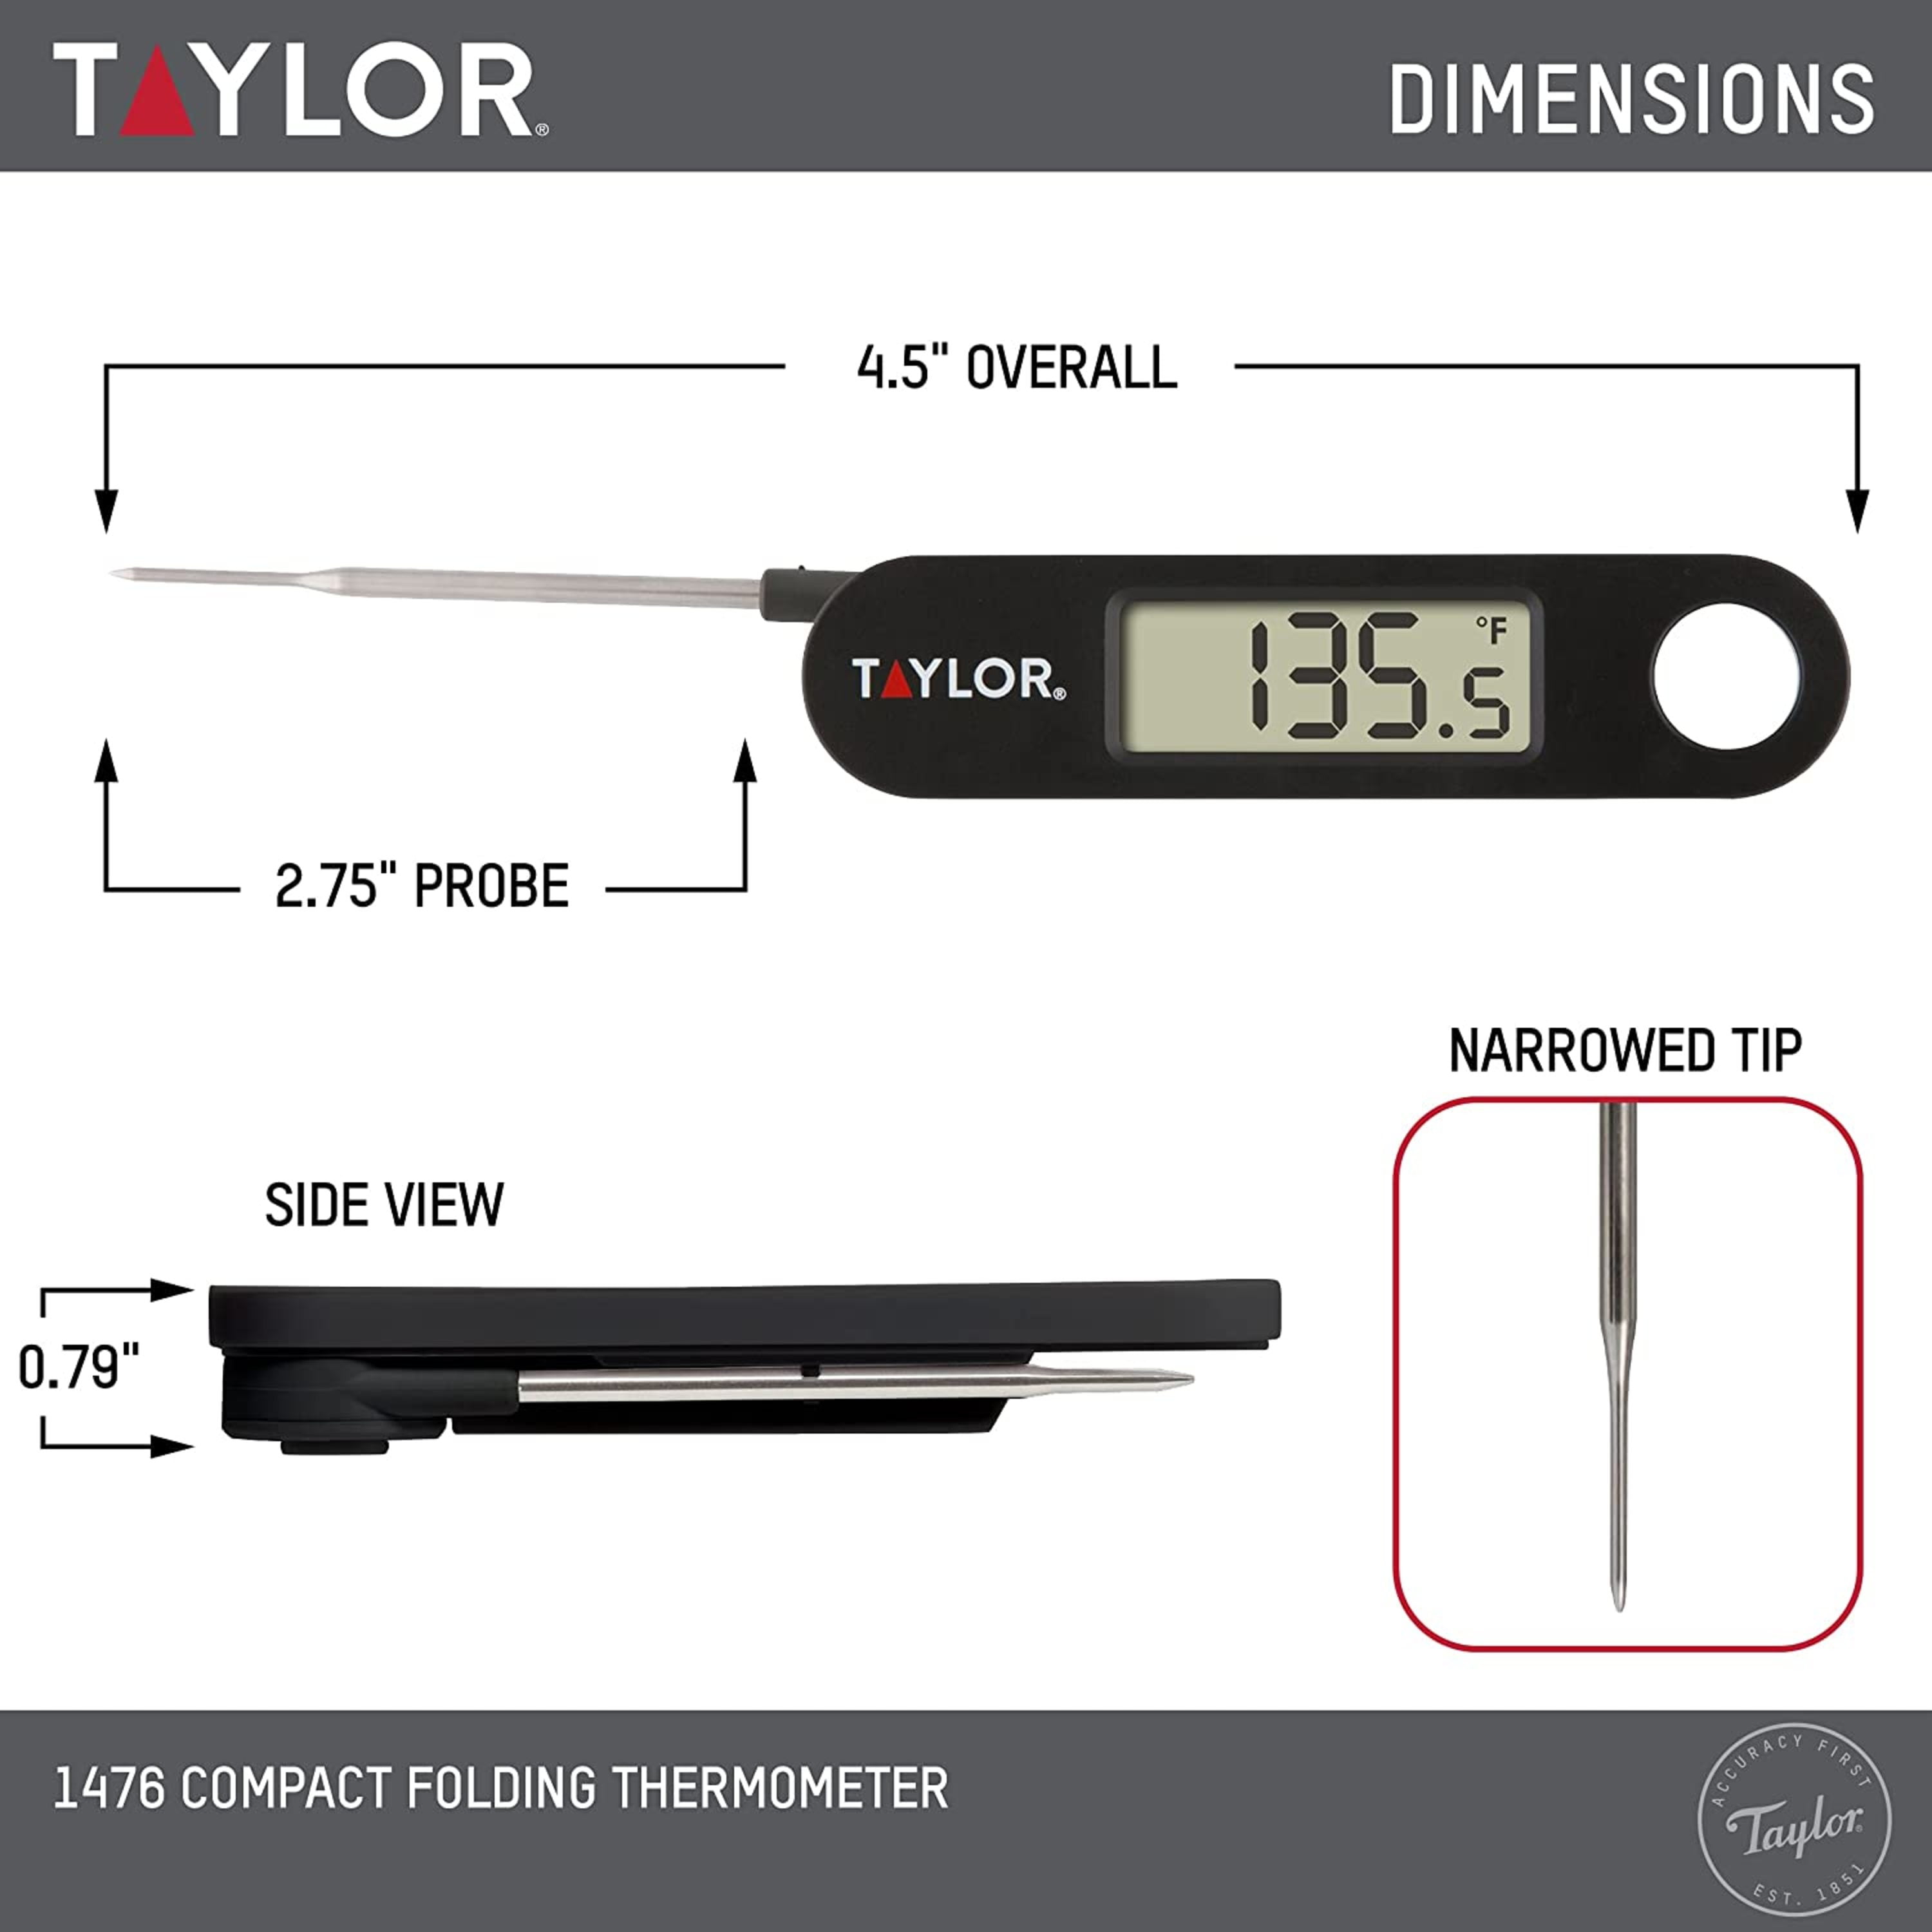 Taylor 5989NFS Instant Read Thermometer, 5